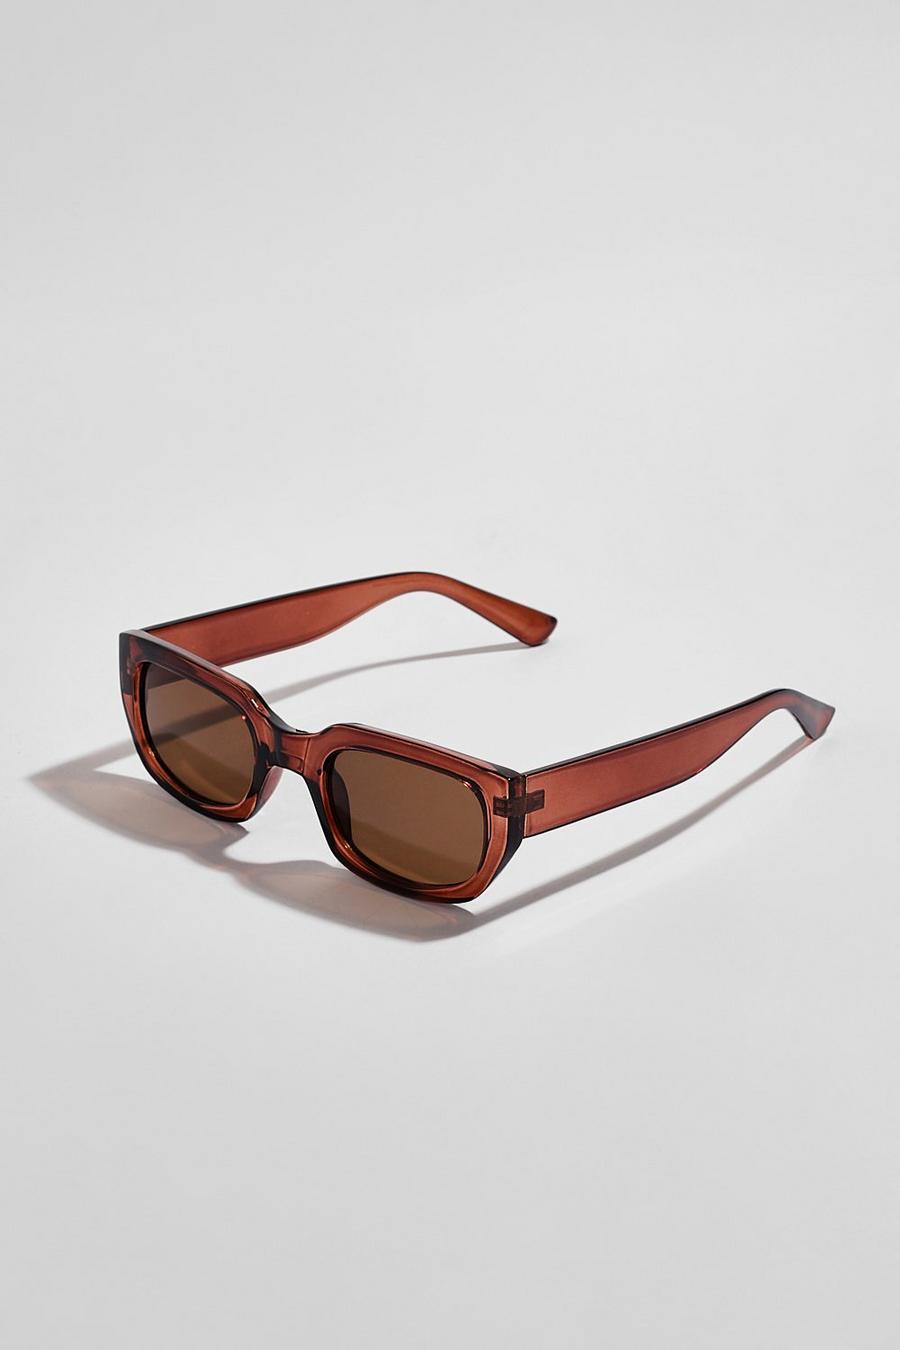 Chocolate brown Rounded 90s Sunglasses